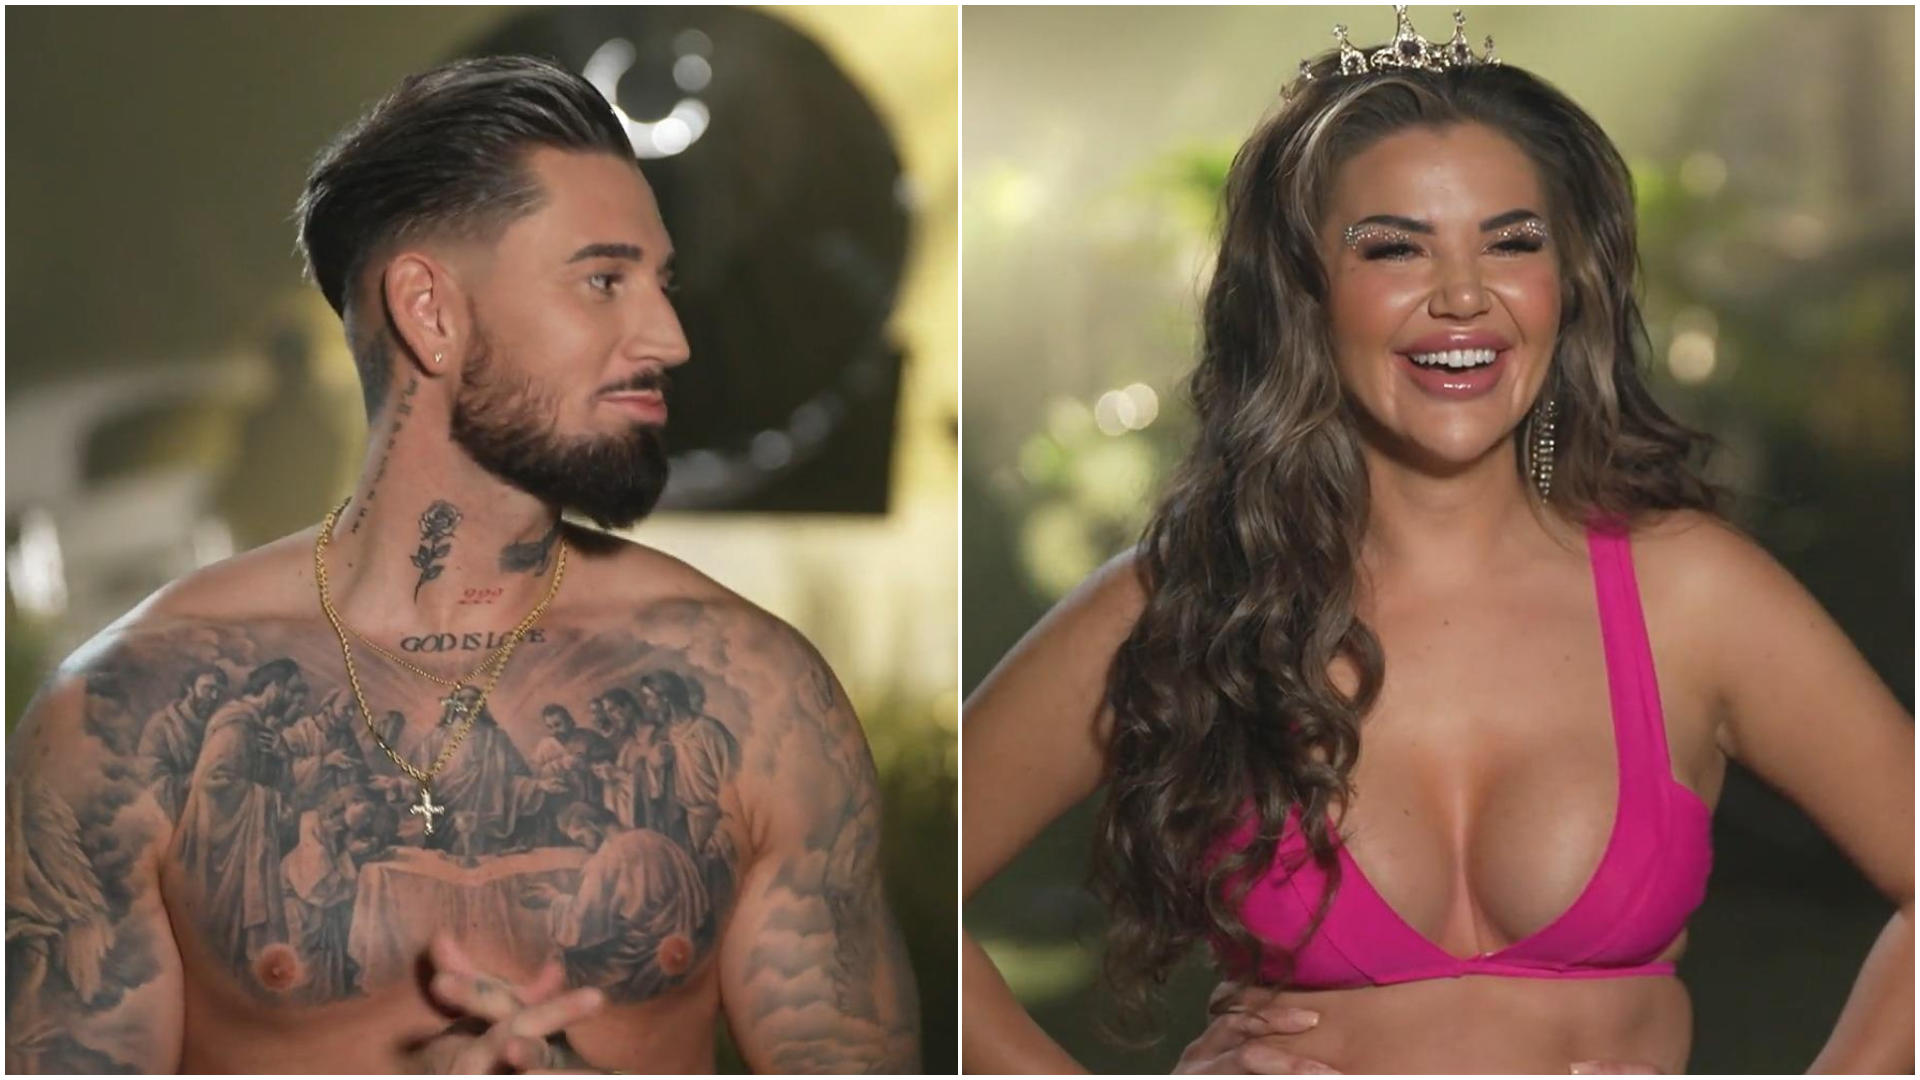 Sex comeback for Mike Heiter and Kim Virginia?  Everything is possible in the jungle camp